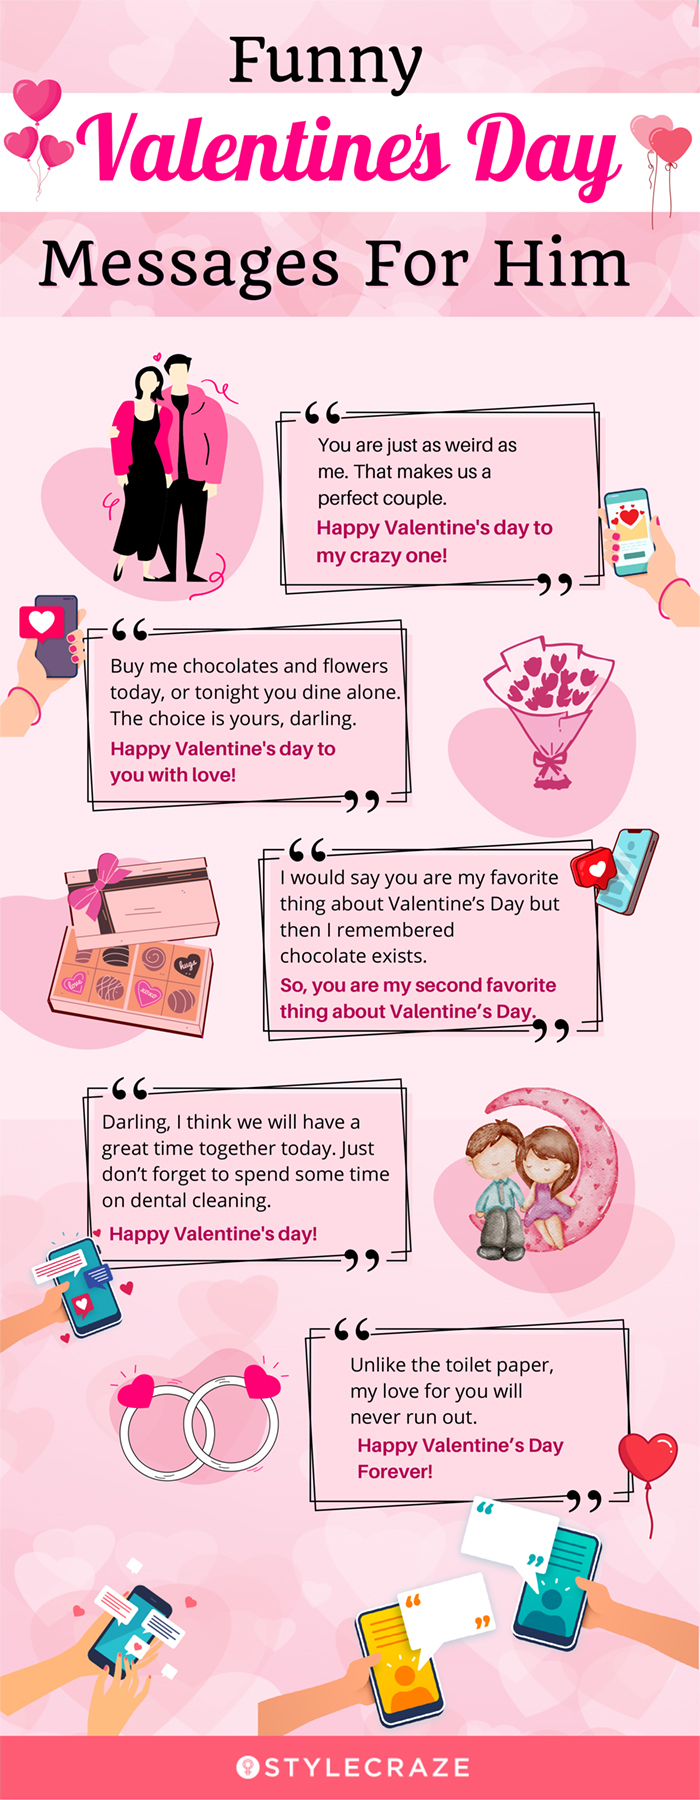 91 Funny Valentine Messages That Will Impress Your Partner